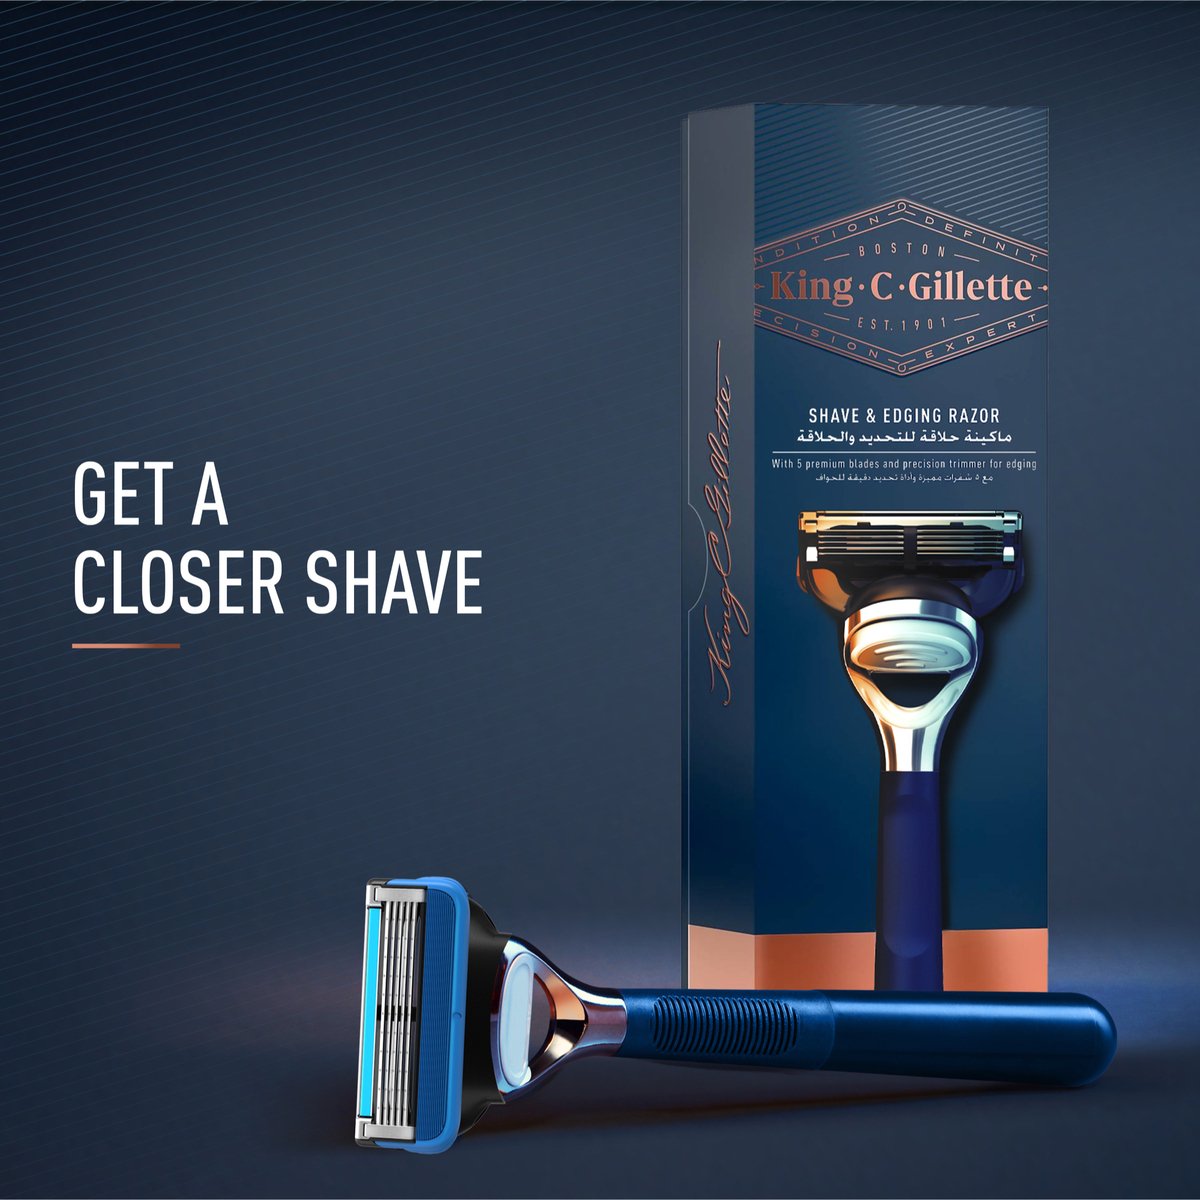 King C. Gillette Men's Refill Shave and Edging Razor Blades Refills with Built In Single Blade Precision Trimmer 3 pcs